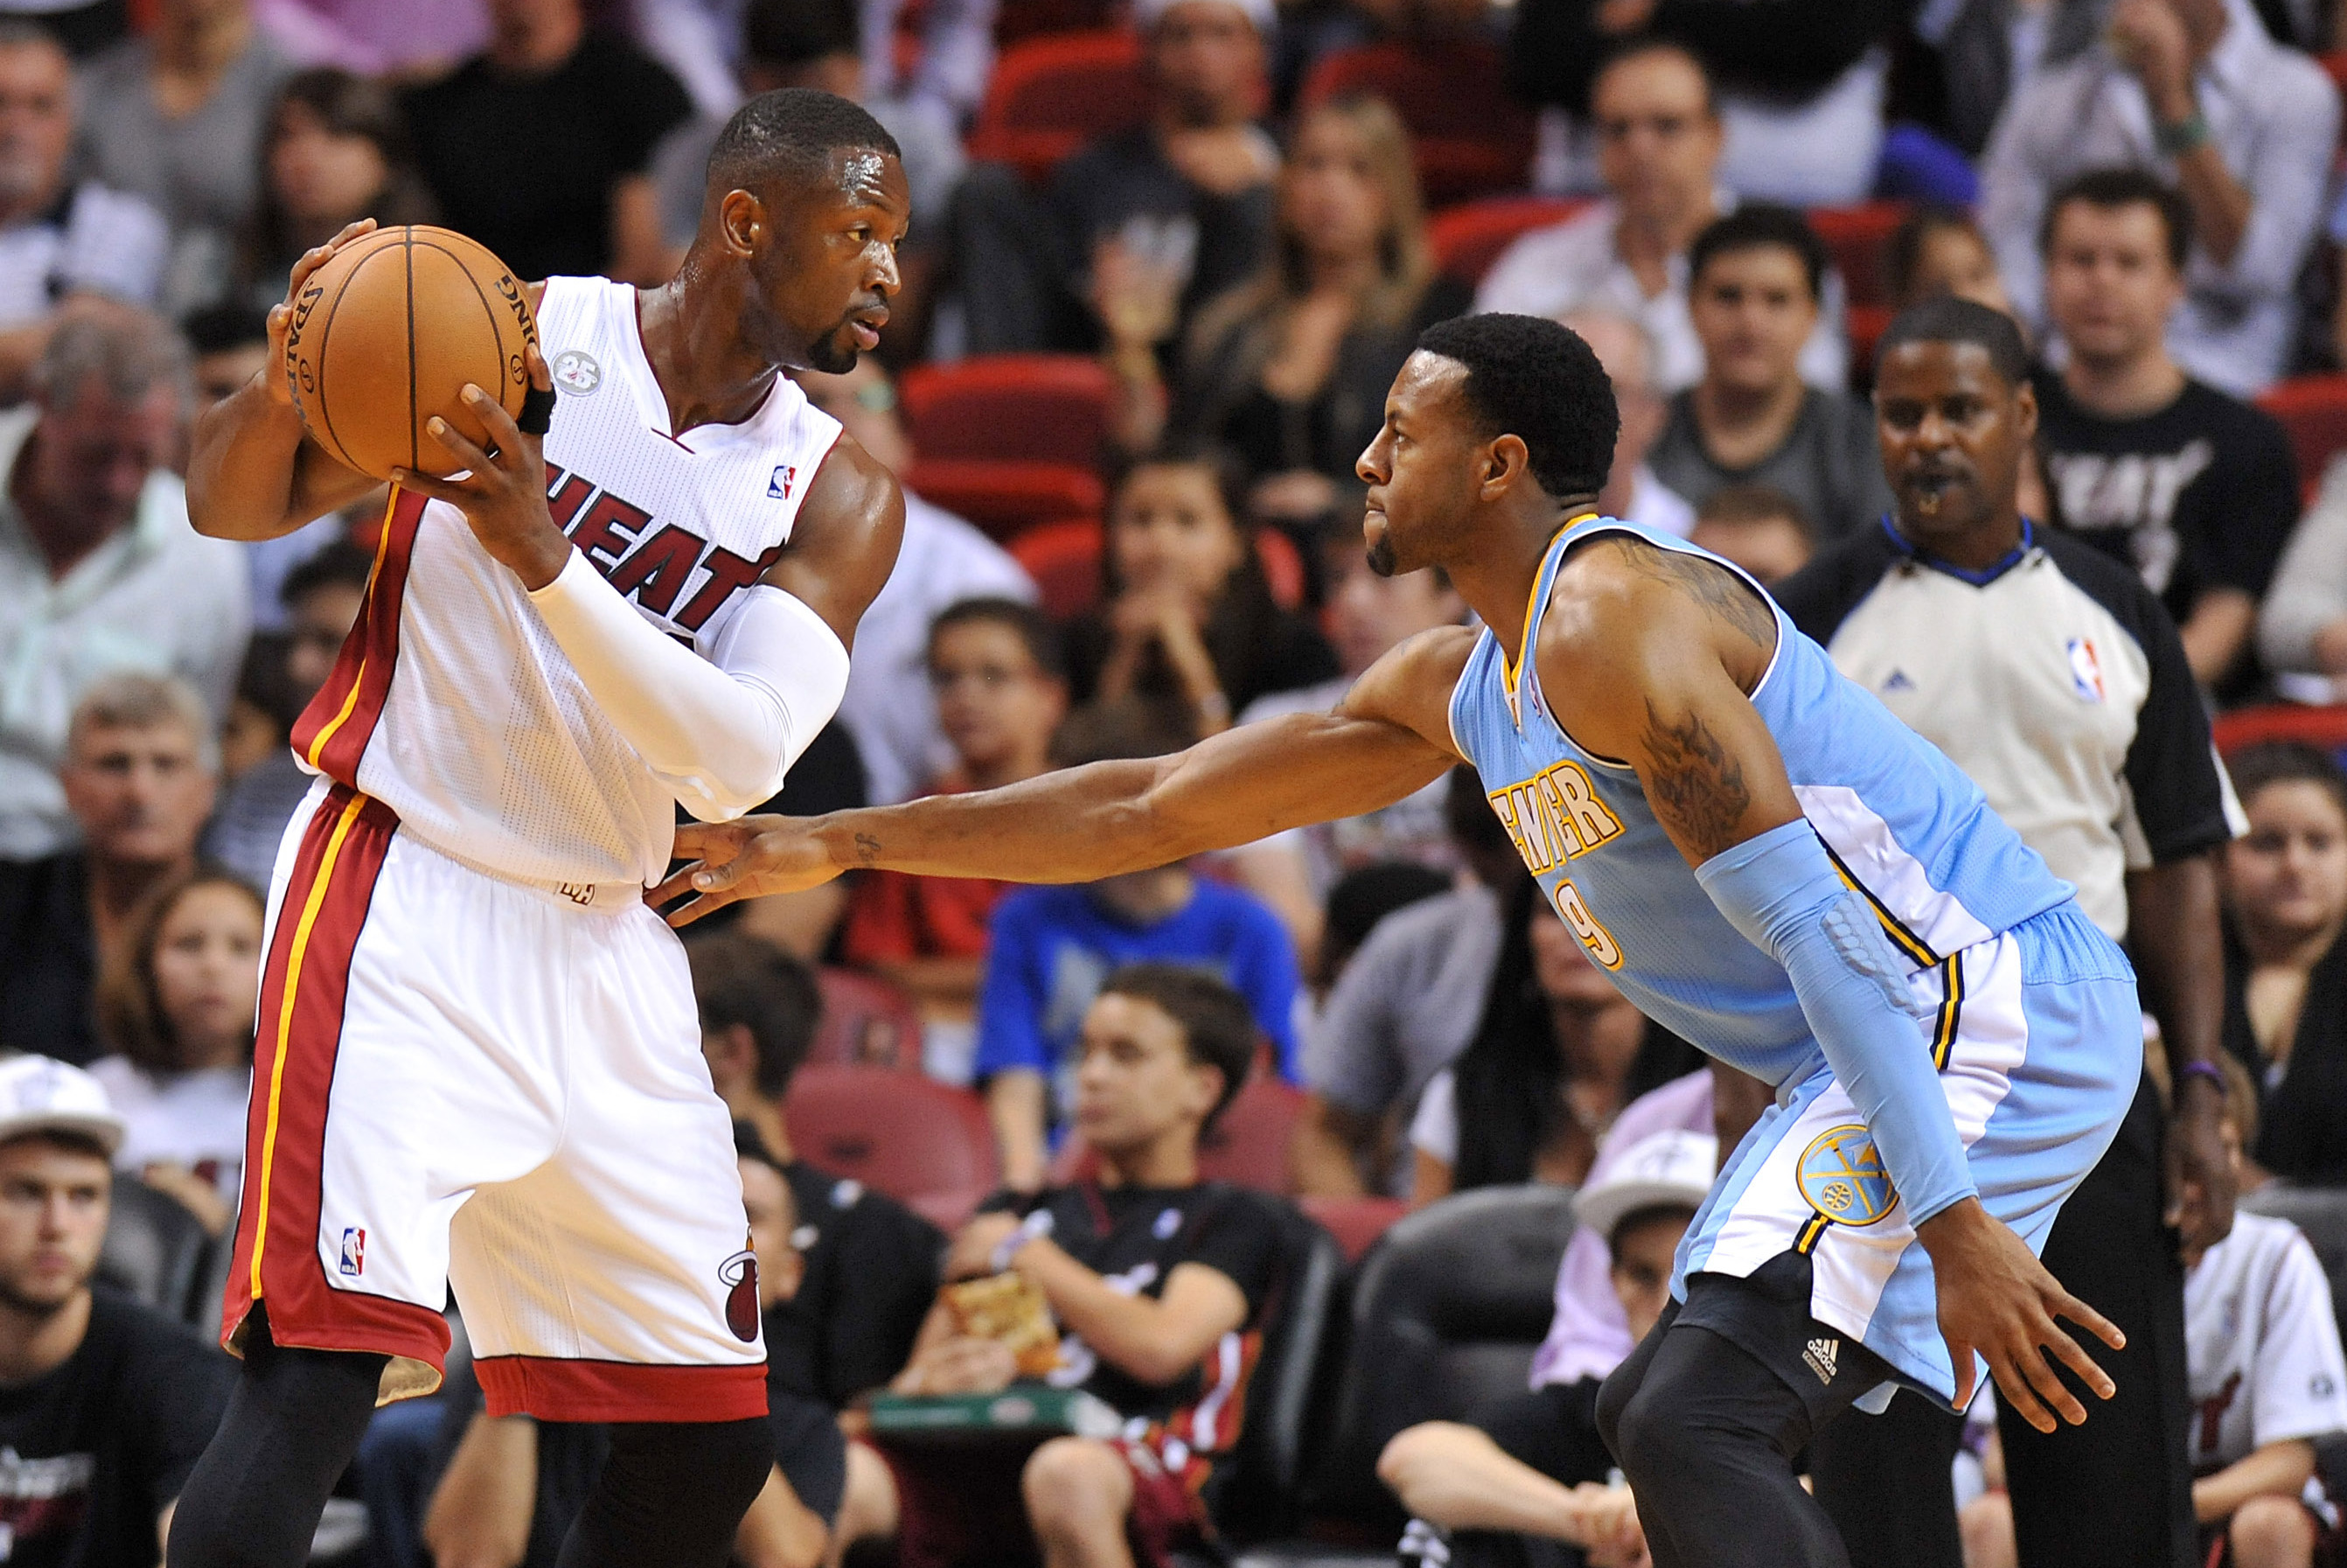 Miami Heat vs Denver Nuggets RECAP: How the action unfolded in NBA